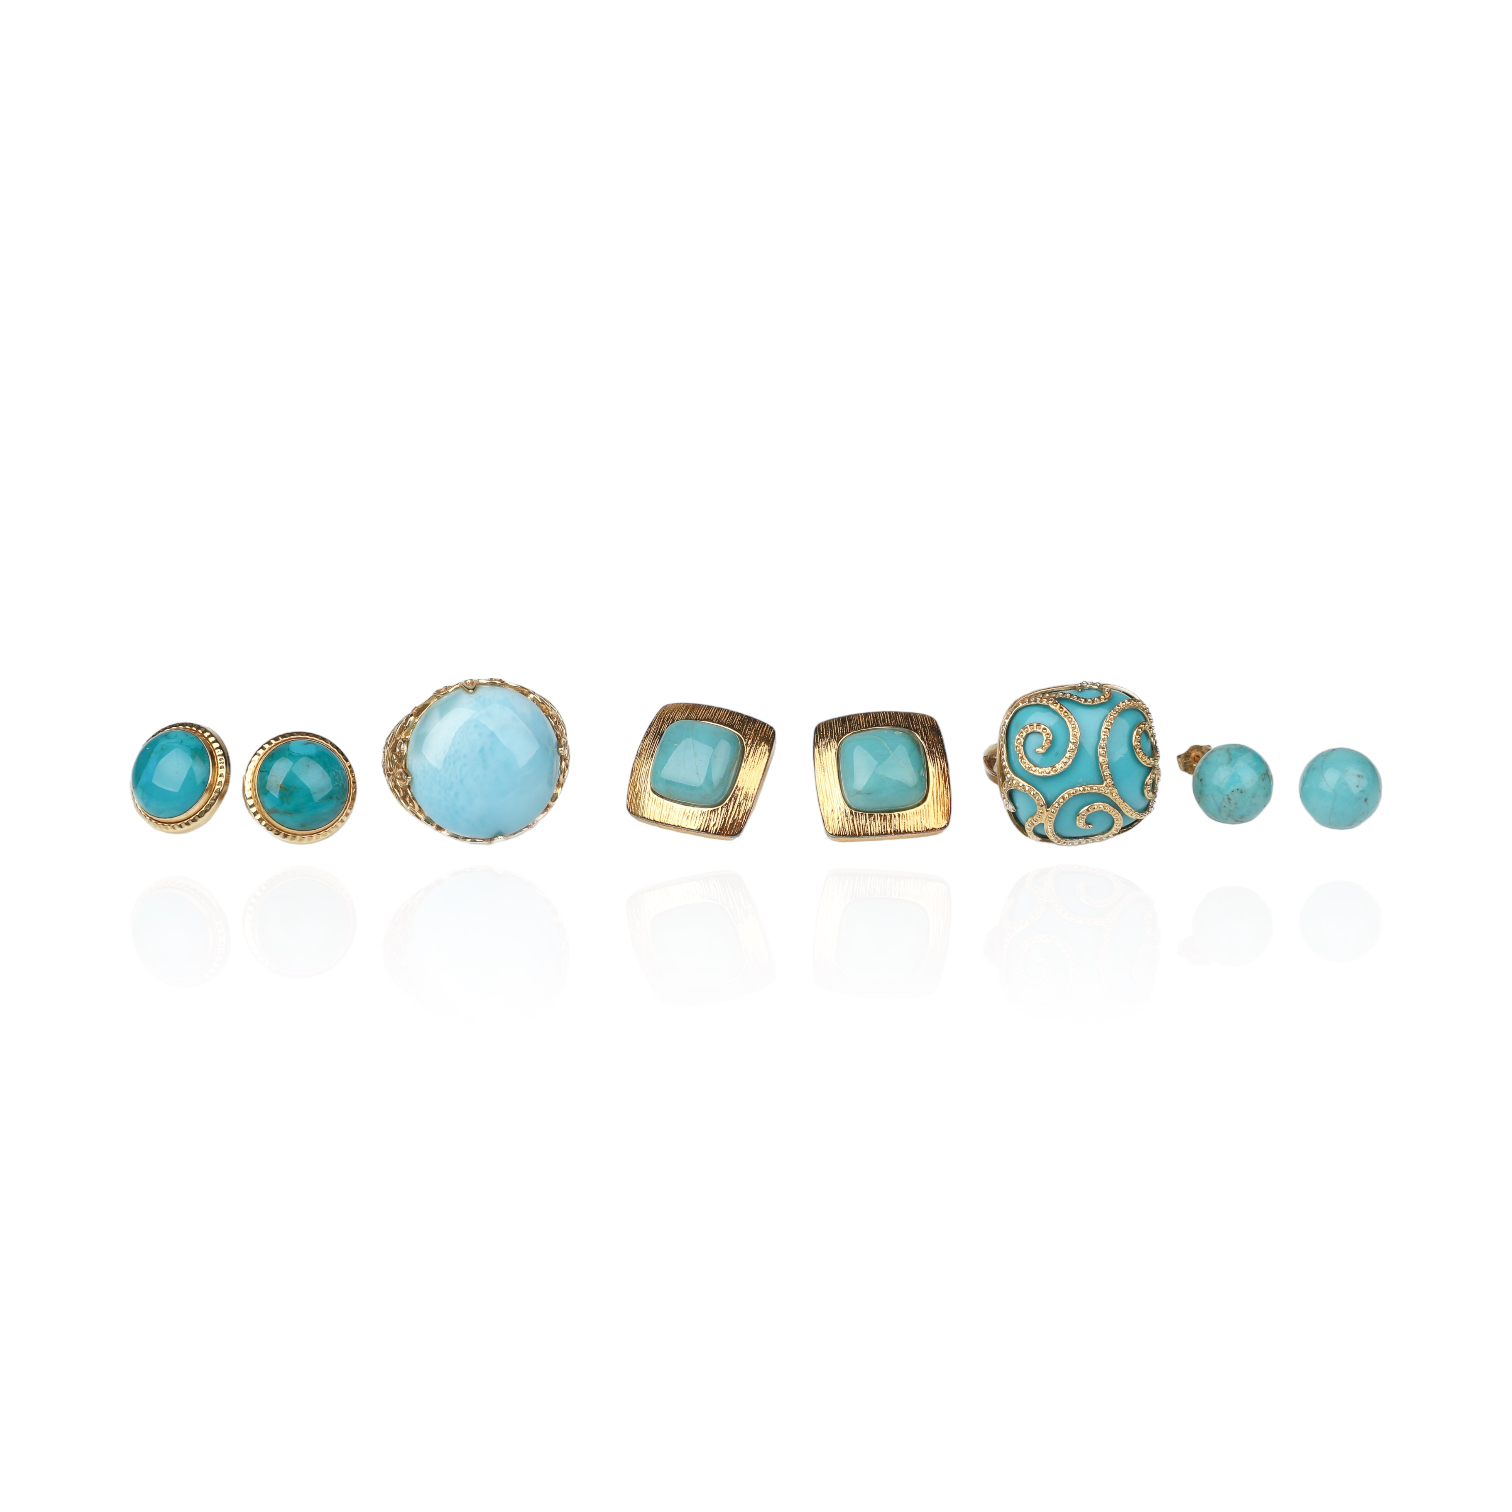  5 Turquoise and Larimar Rings 3b39f1